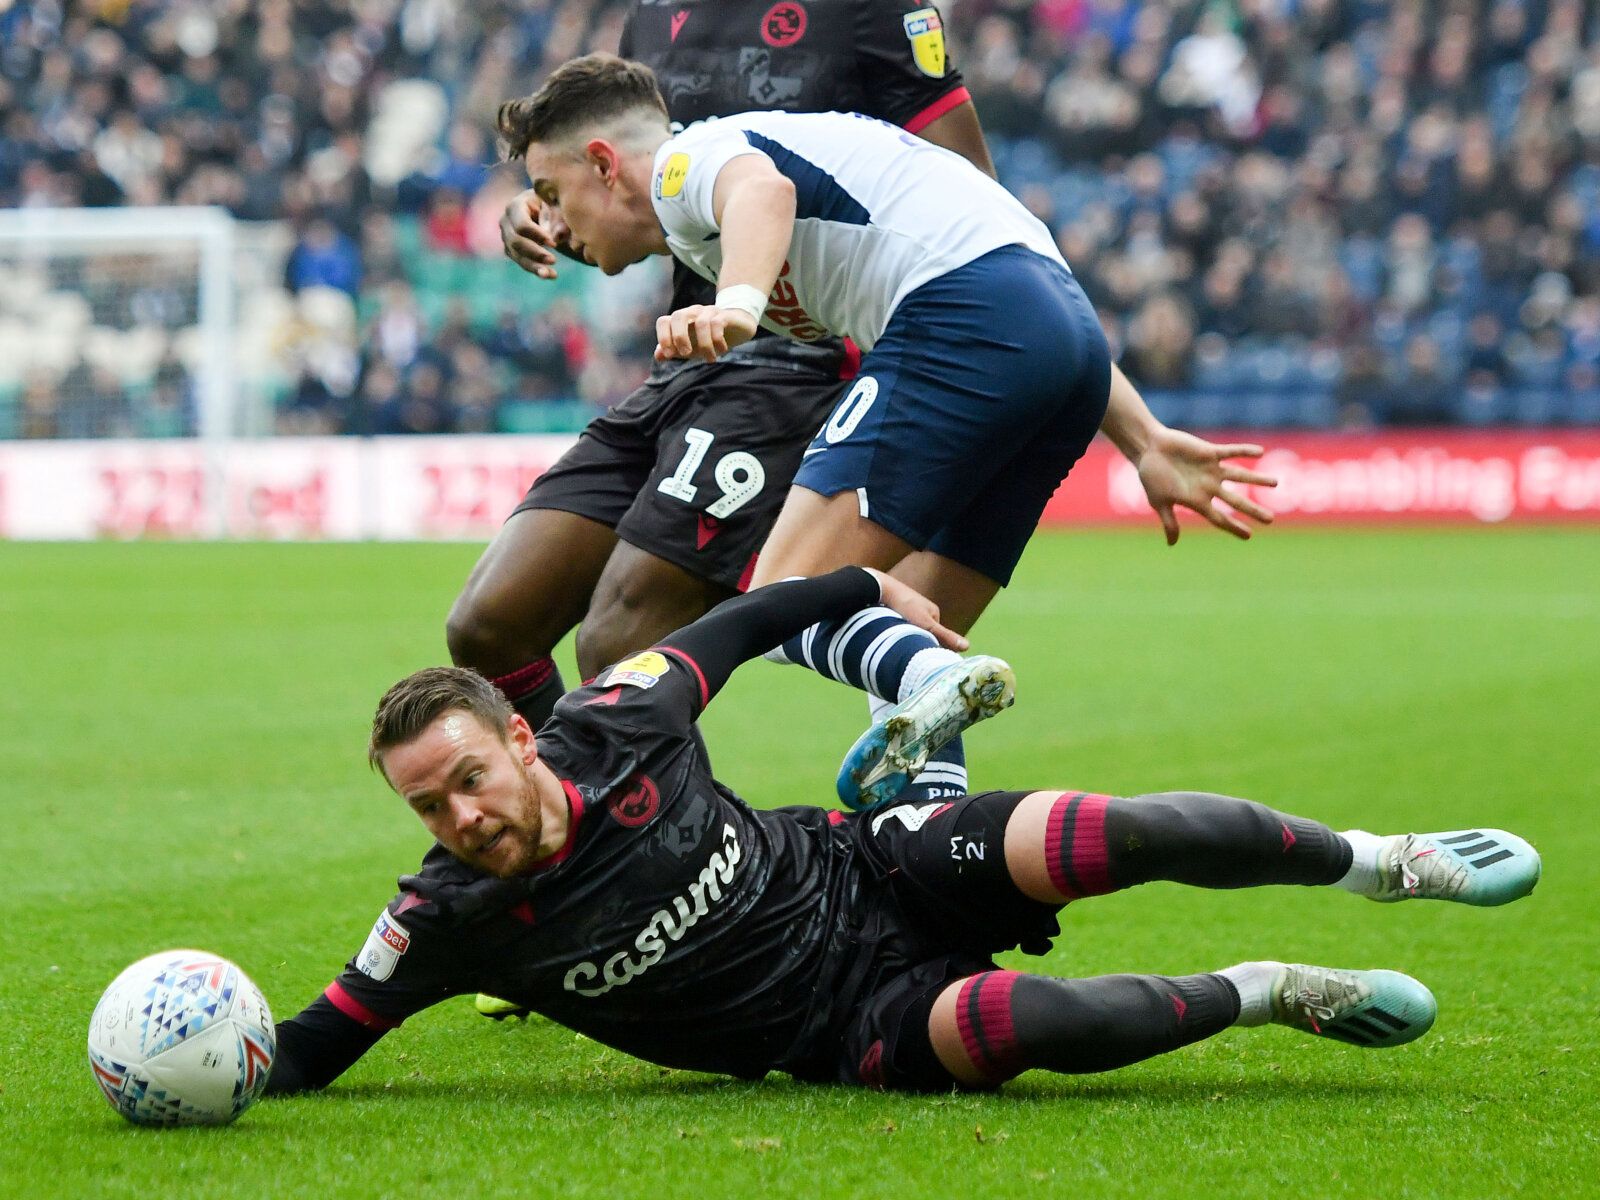 Soccer Football - Championship - Preston North End v Reading - Deepdale, Preston, Britain - December 29, 2019   Preston's Josh Harrop in action with Reading's Chris Gunter   Action Images/Paul Burrows    EDITORIAL USE ONLY. No use with unauthorized audio, video, data, fixture lists, club/league logos or 